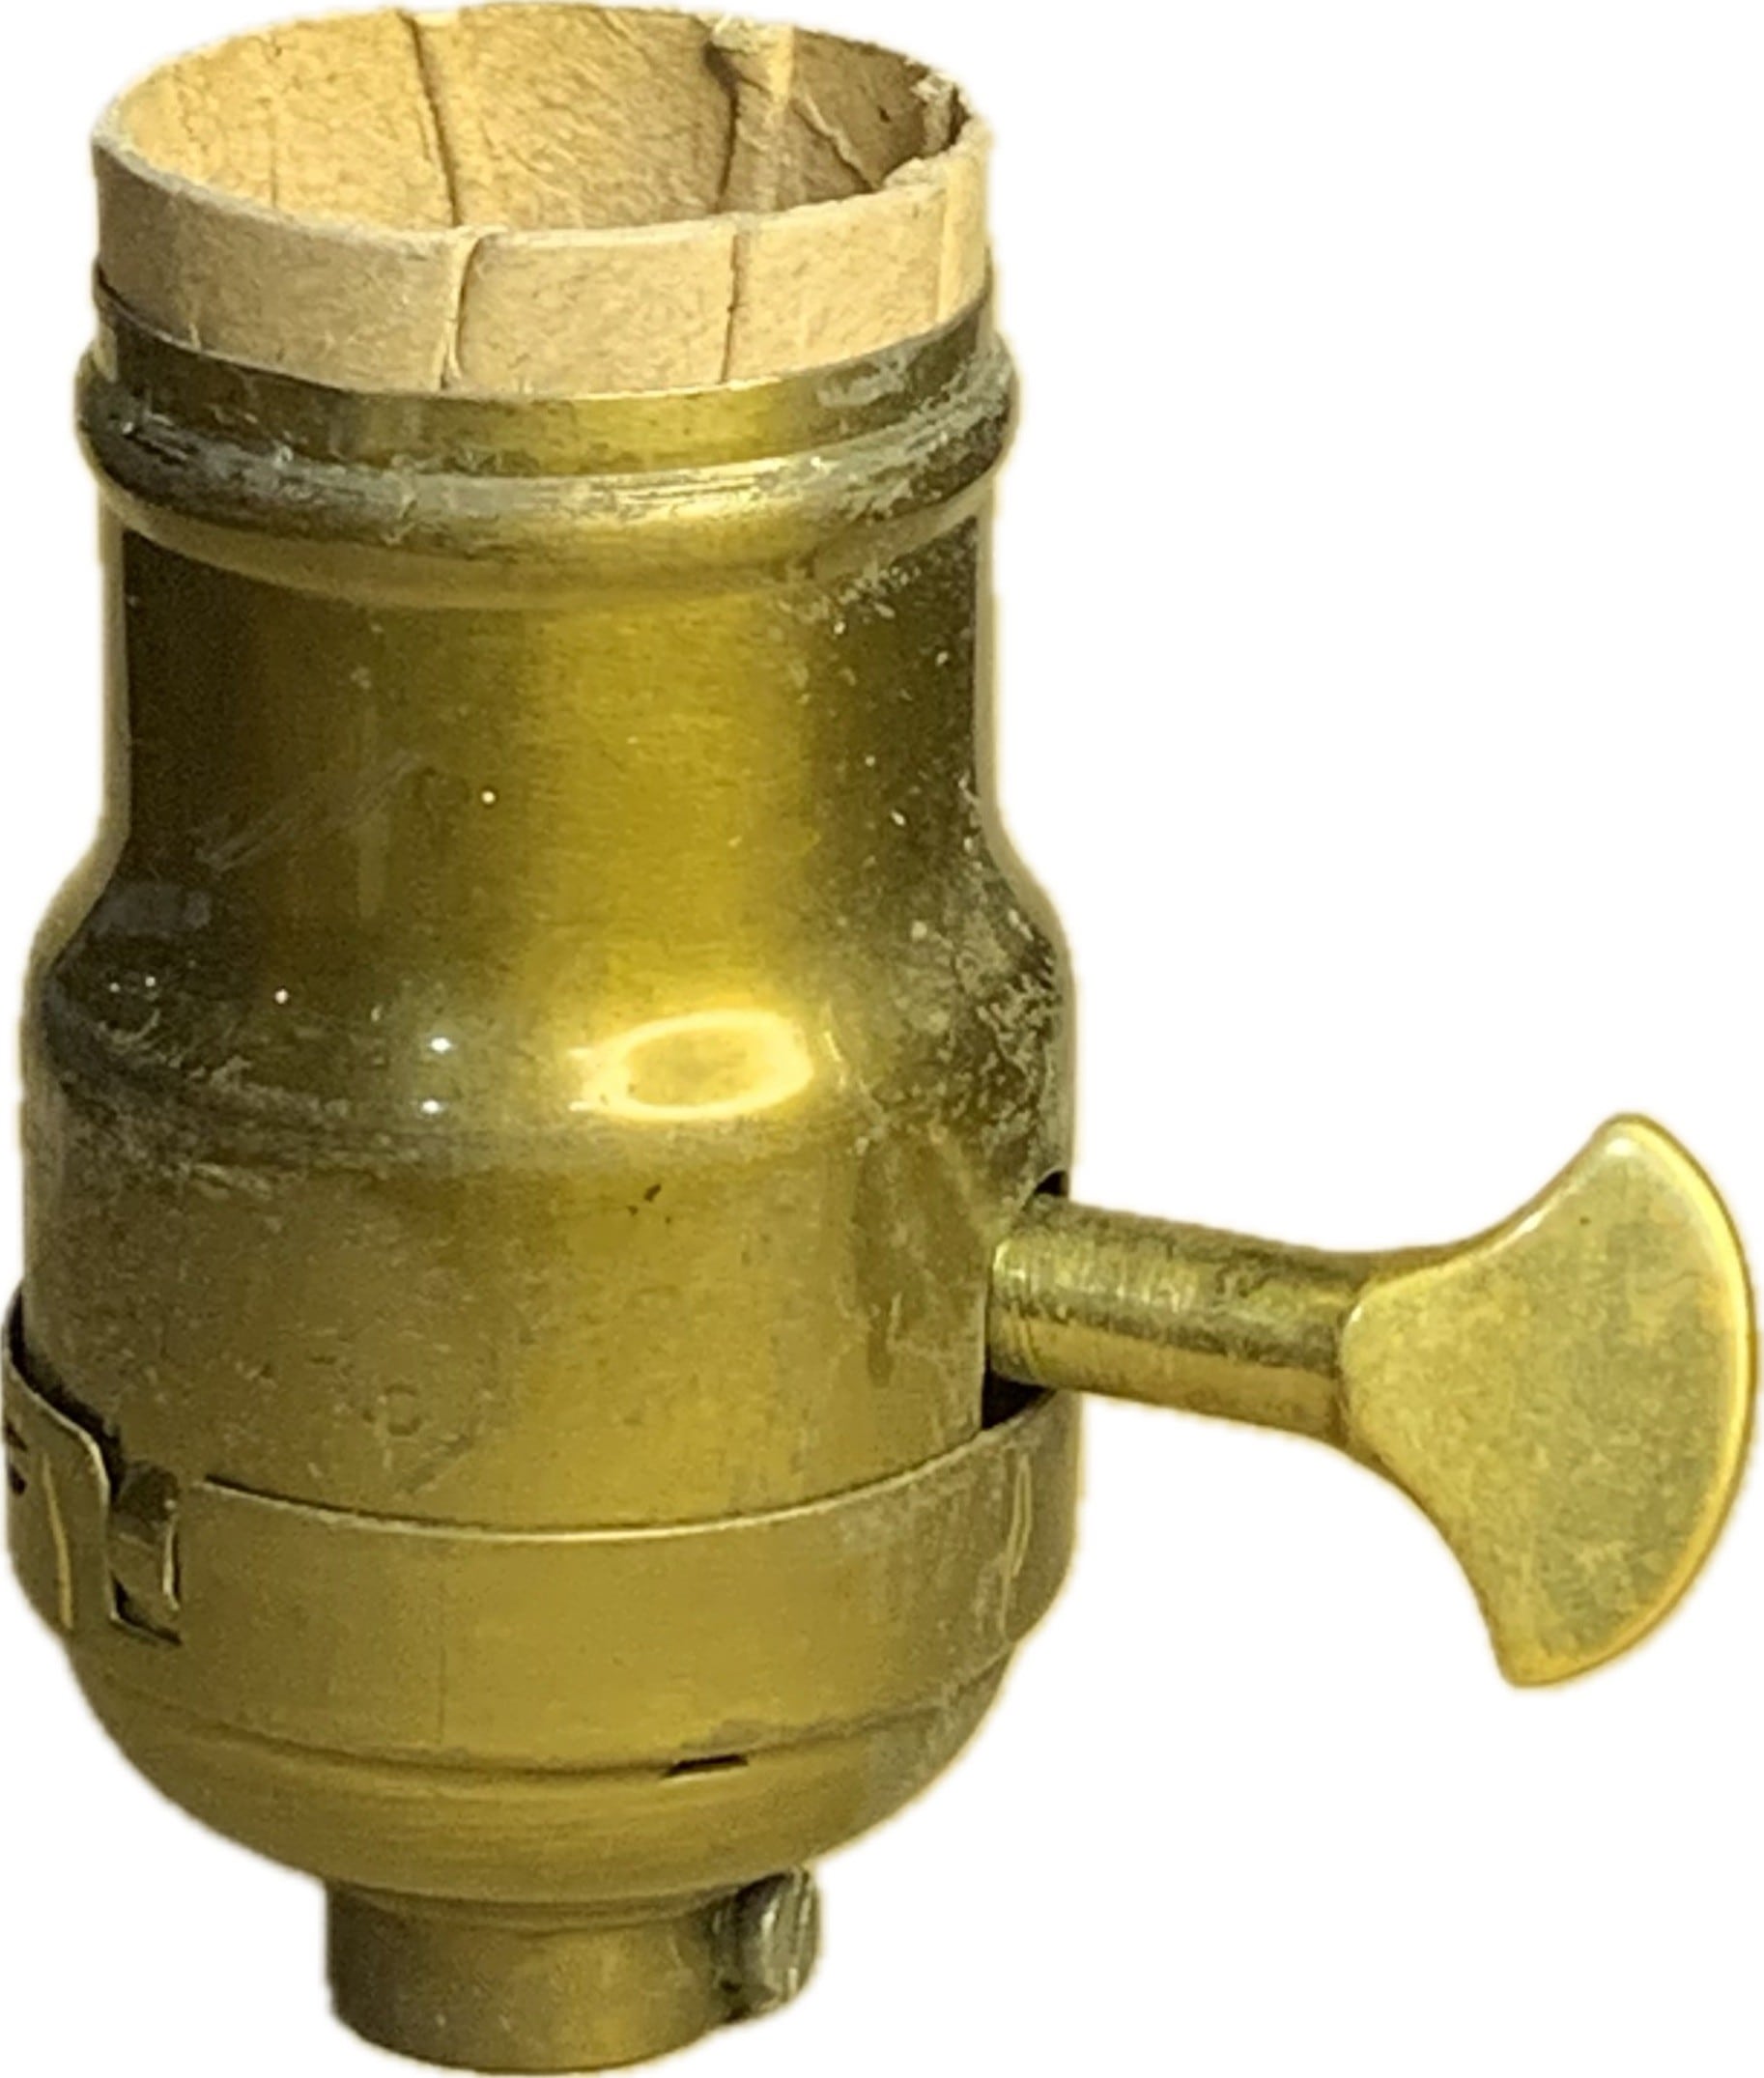 Solid brass vintage electric light socket with unique brass turn key available at The Lamp Repair Shop in South Portland, Maine.